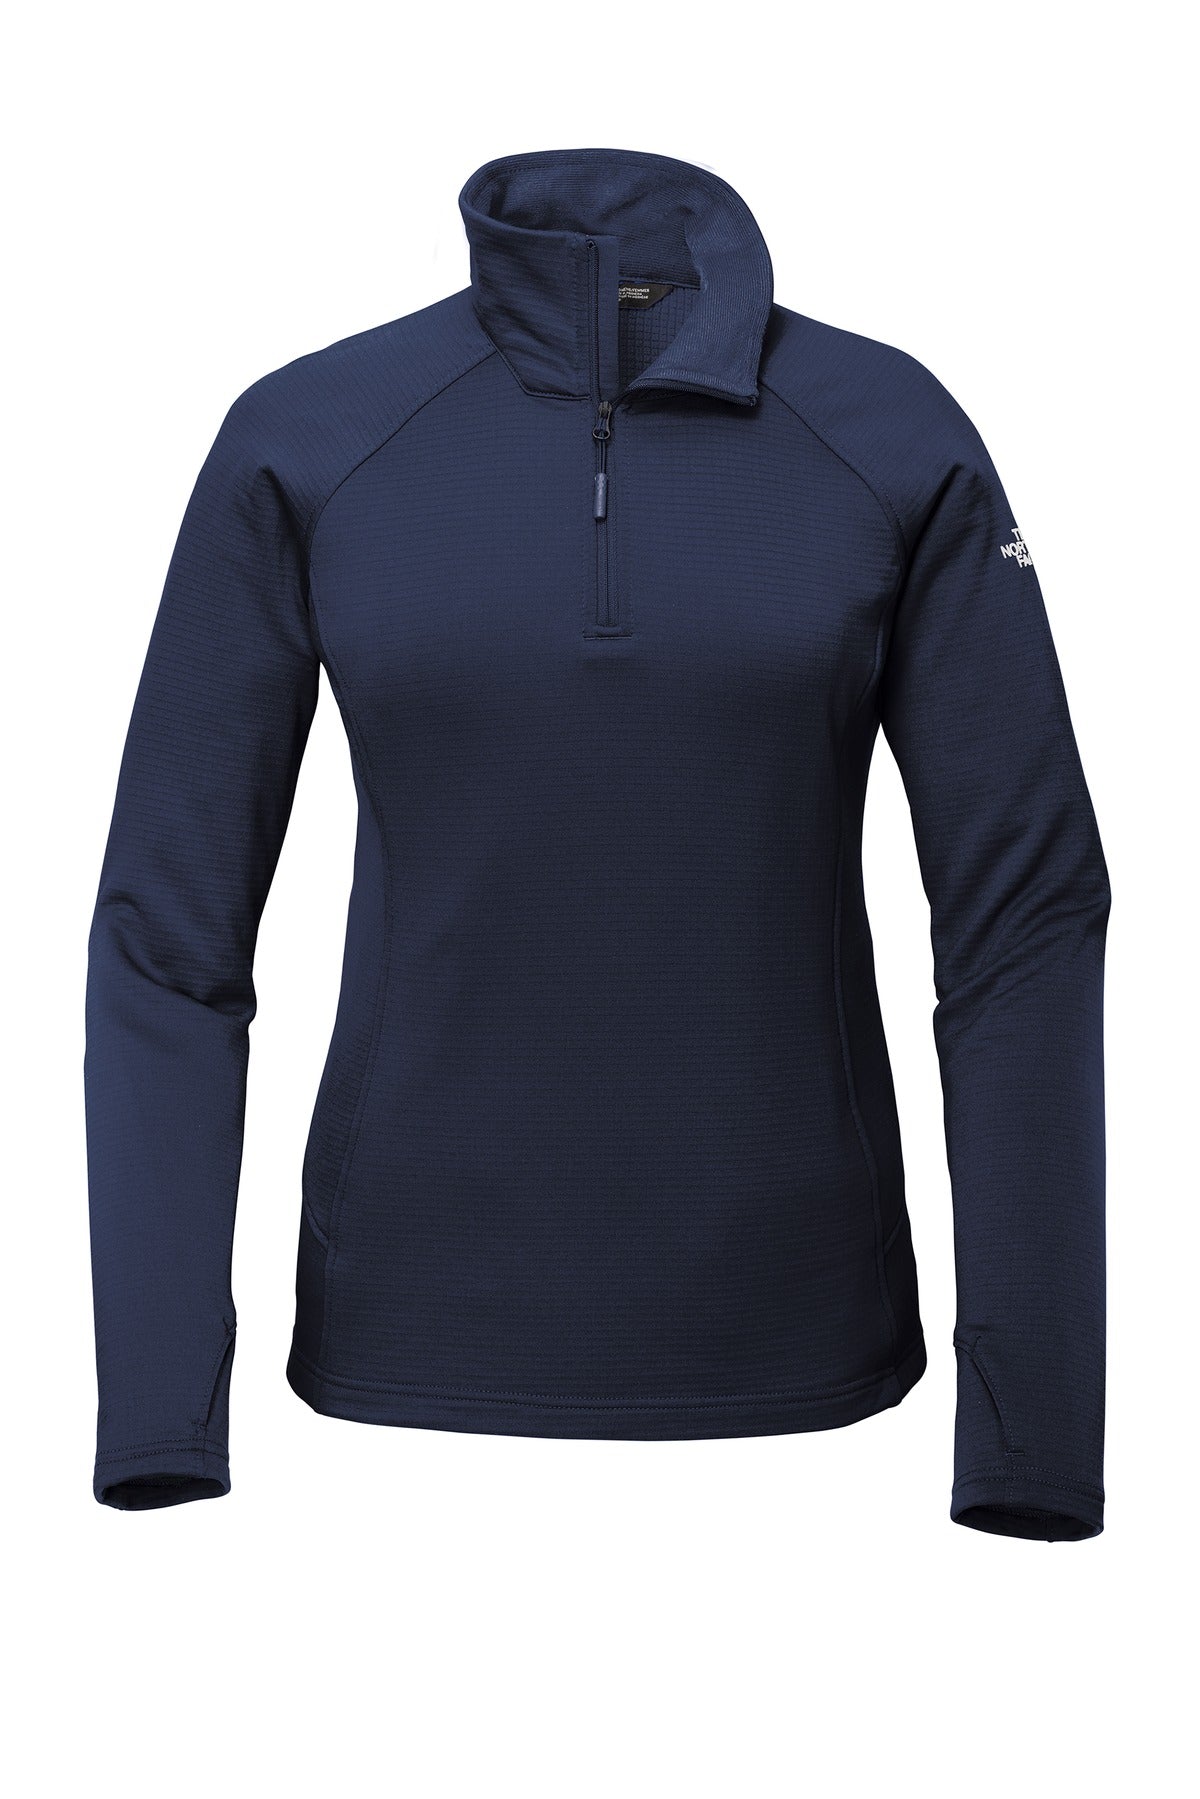 The North Face Ladies Mountain Peaks 1/4-Zip Fleece NF0A47FC